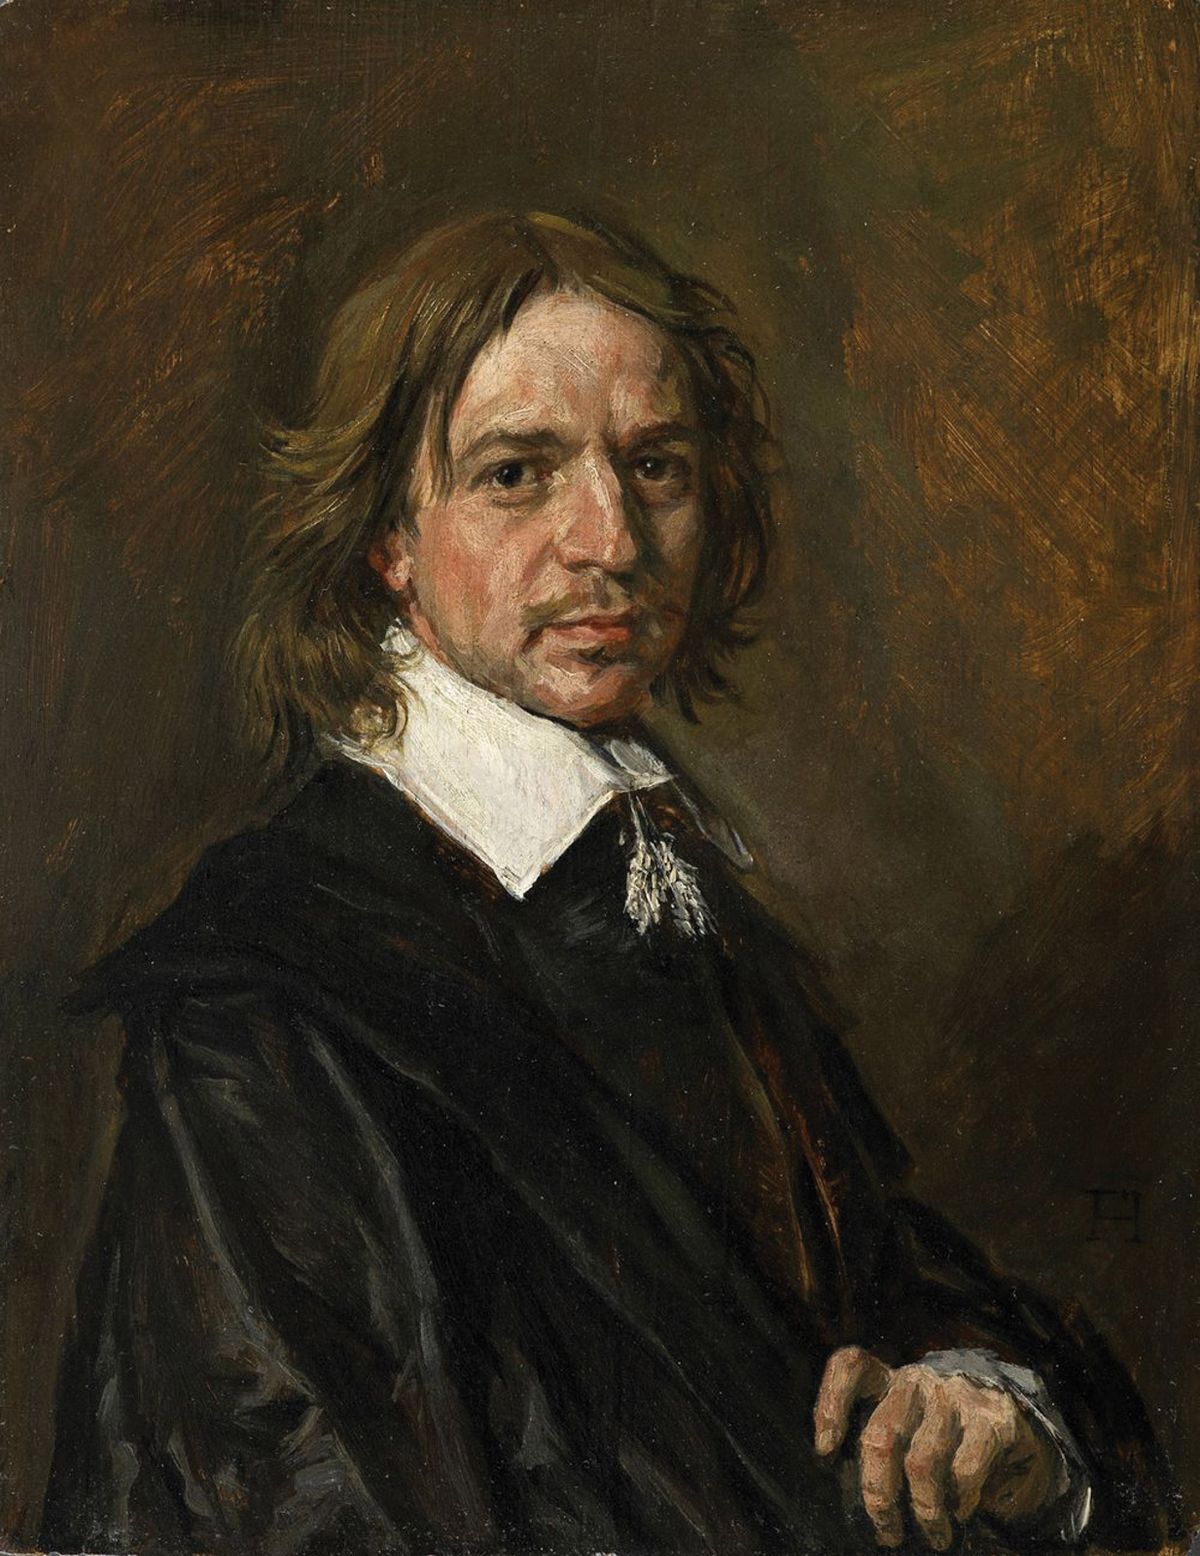 Scientific analysis of the portrait of an unknown man revealed two modern pigments Sotheby’s